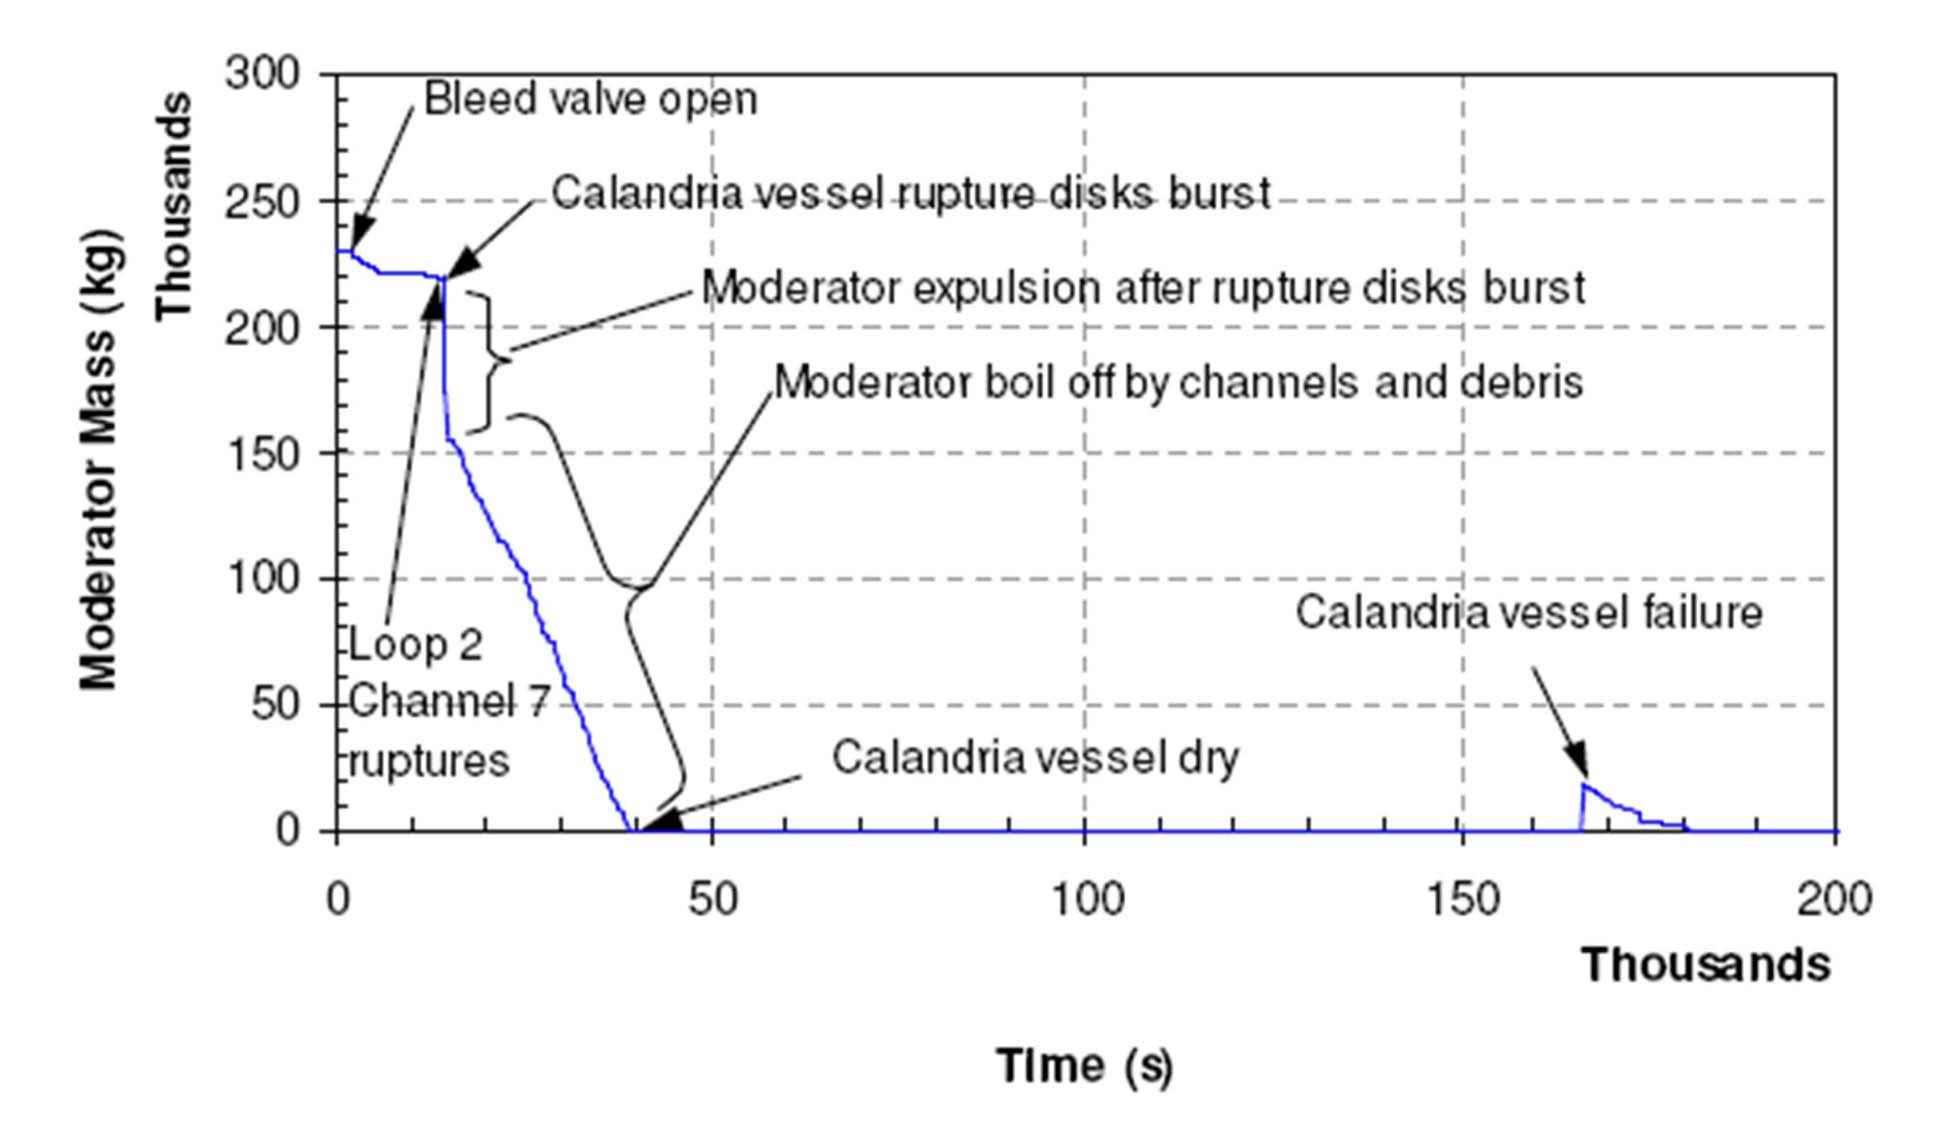 The Moderator Mass Inside the Calandria Vessel in a
Generic CANDU 6 Reactor Following a Postulated Station
Blackout Event